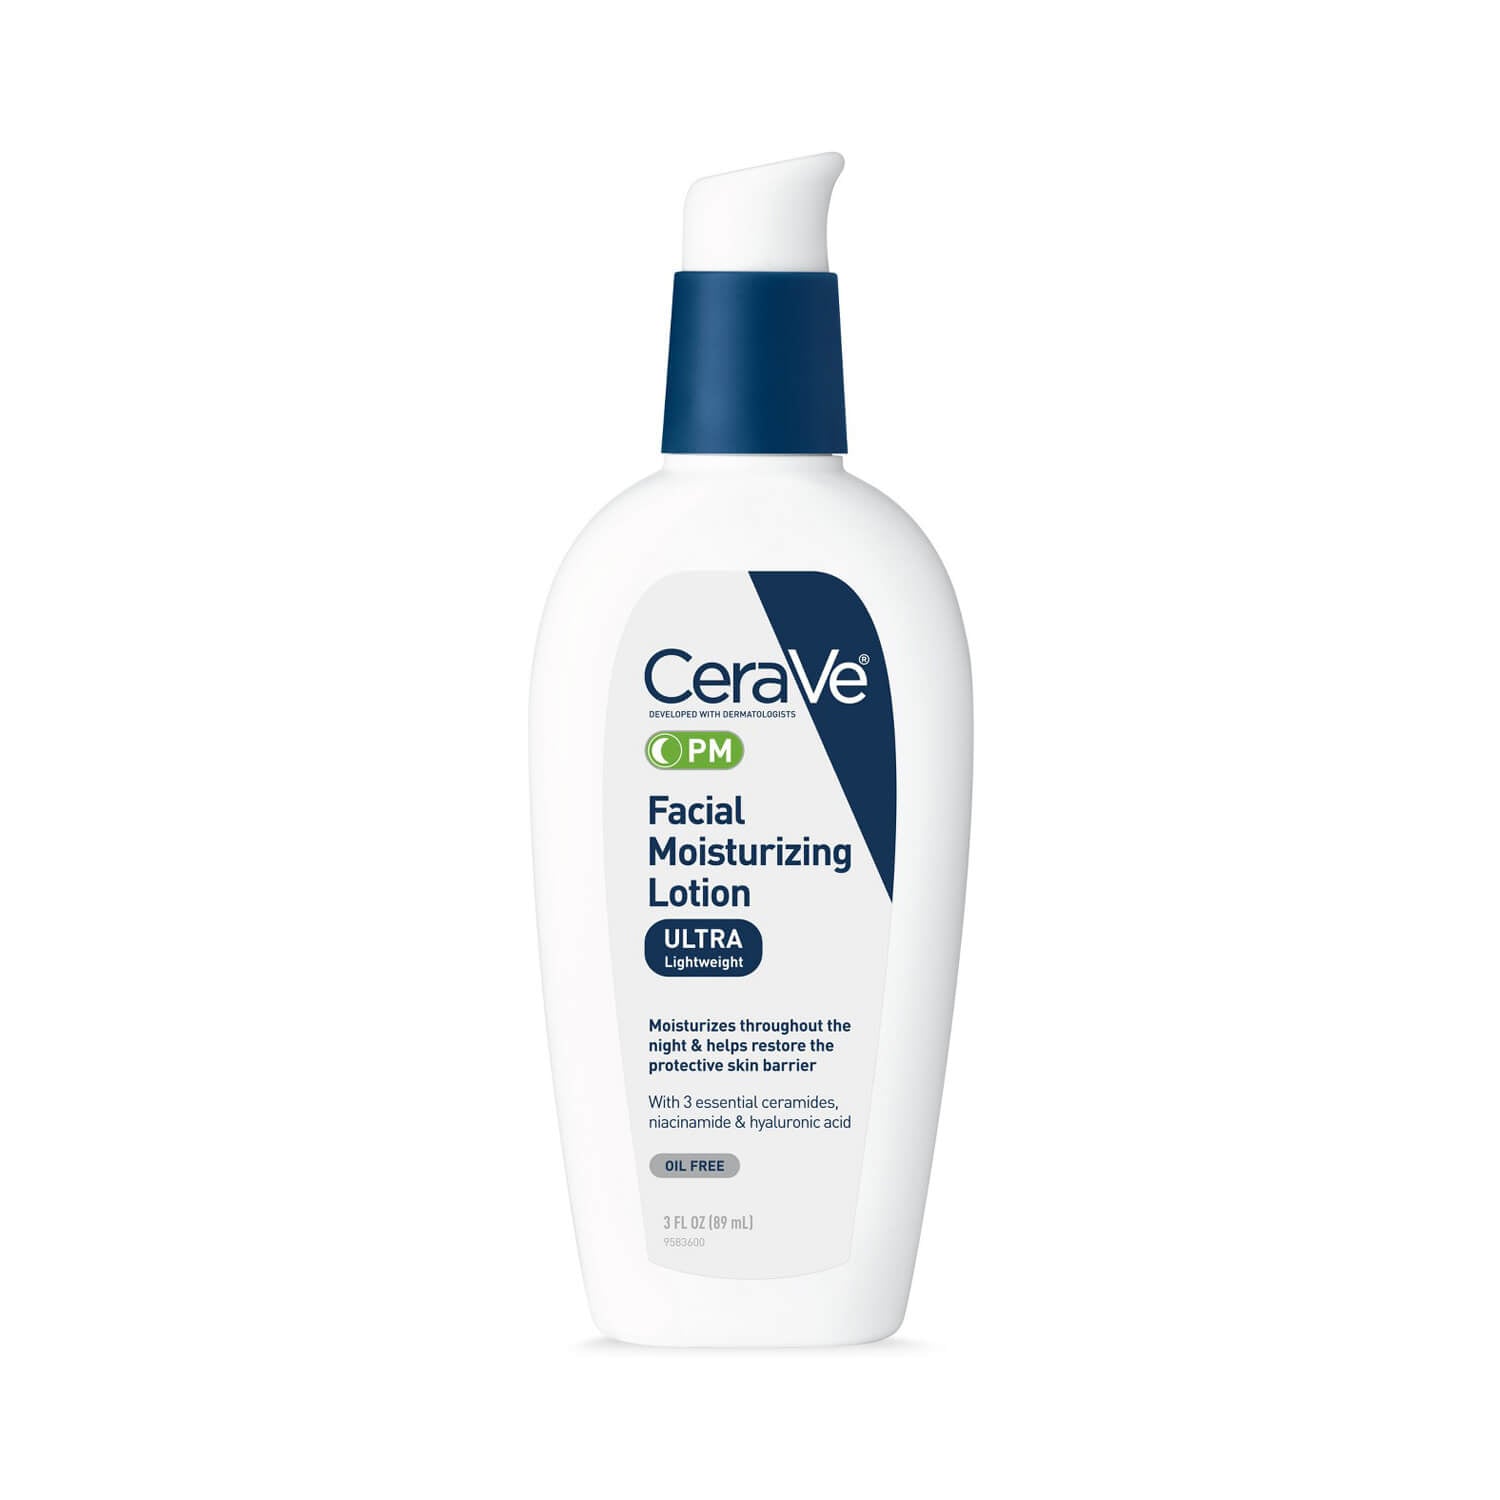 CeraVe PM Facial Moisturizing Lotion for Nighttime Use